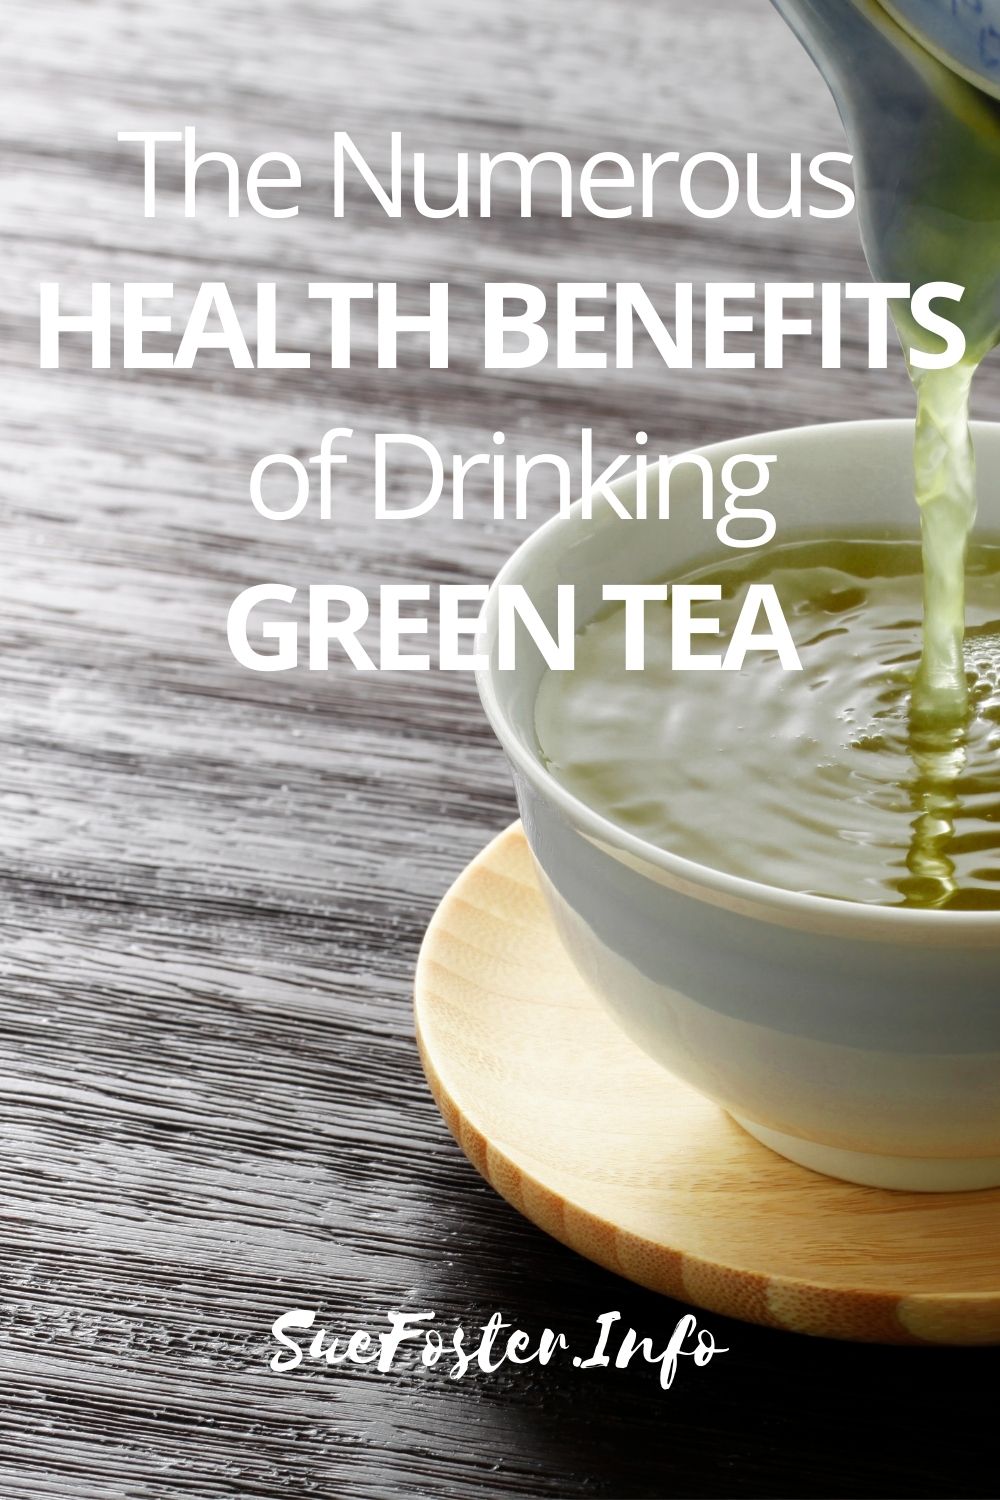 green tea has many health benefits, including anti-cancer effects. In addition, it may also reduce the risk of cardiovascular disease and other chronic illnesses and even alter your mood.